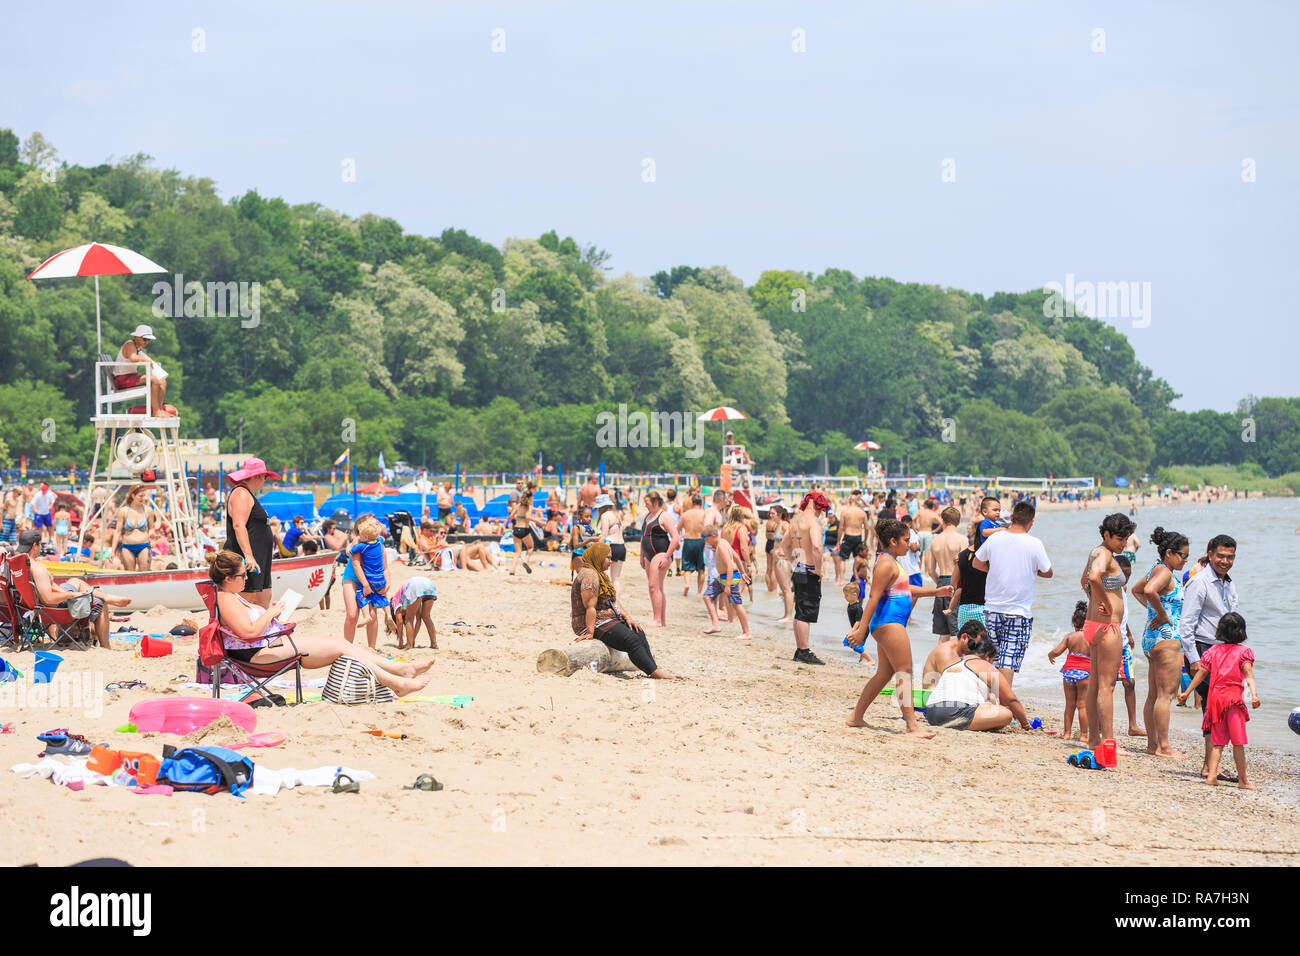 crowds of people fill a beach on a hot summer day Stock Photo